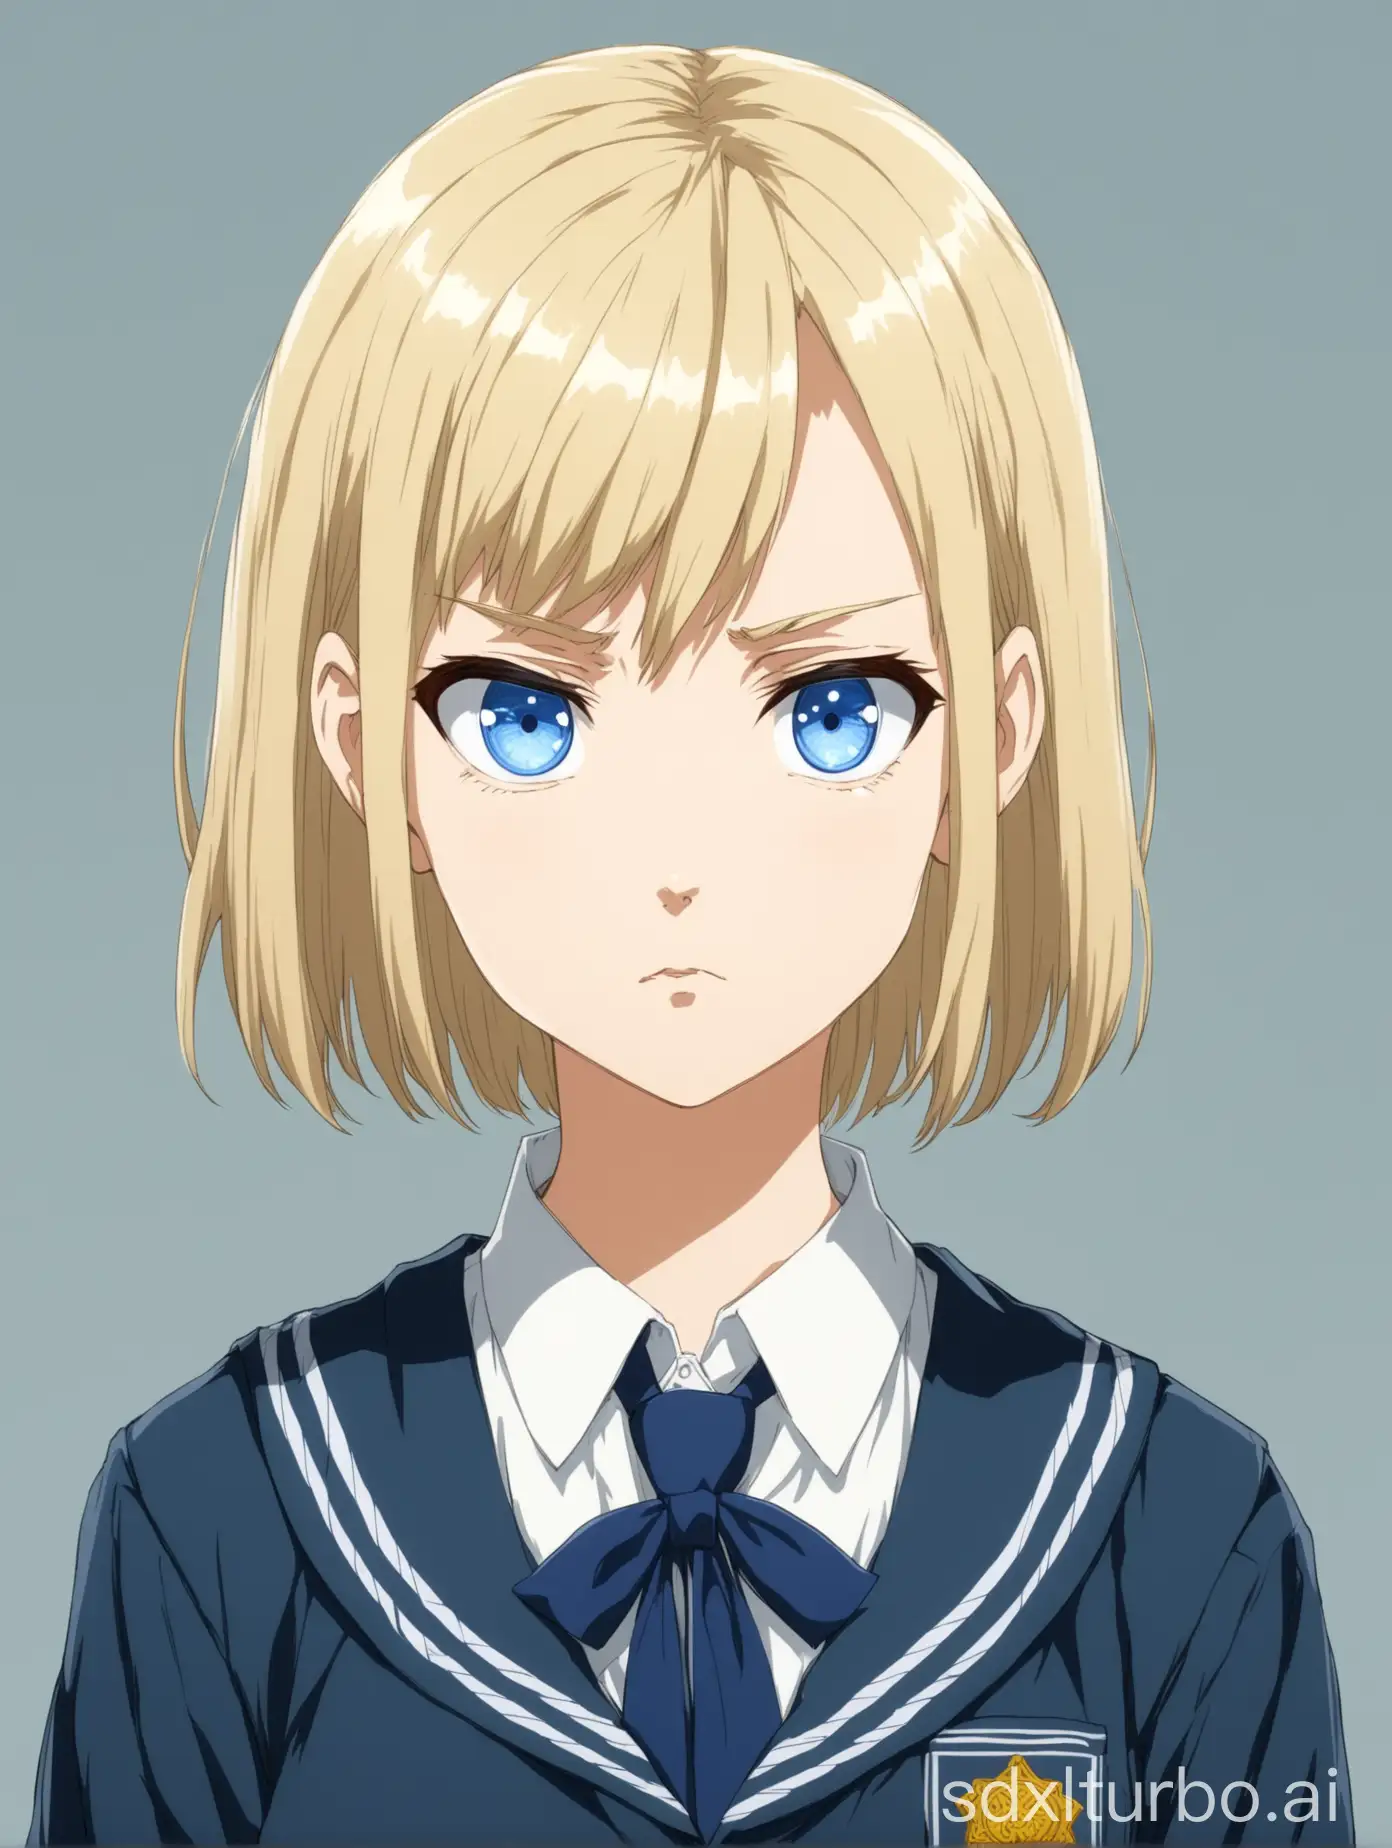 Anime character design of tall 17-year-old serious but loving kind looking girl with serious expression, with short blond hair and blue eyes wearing school uniform